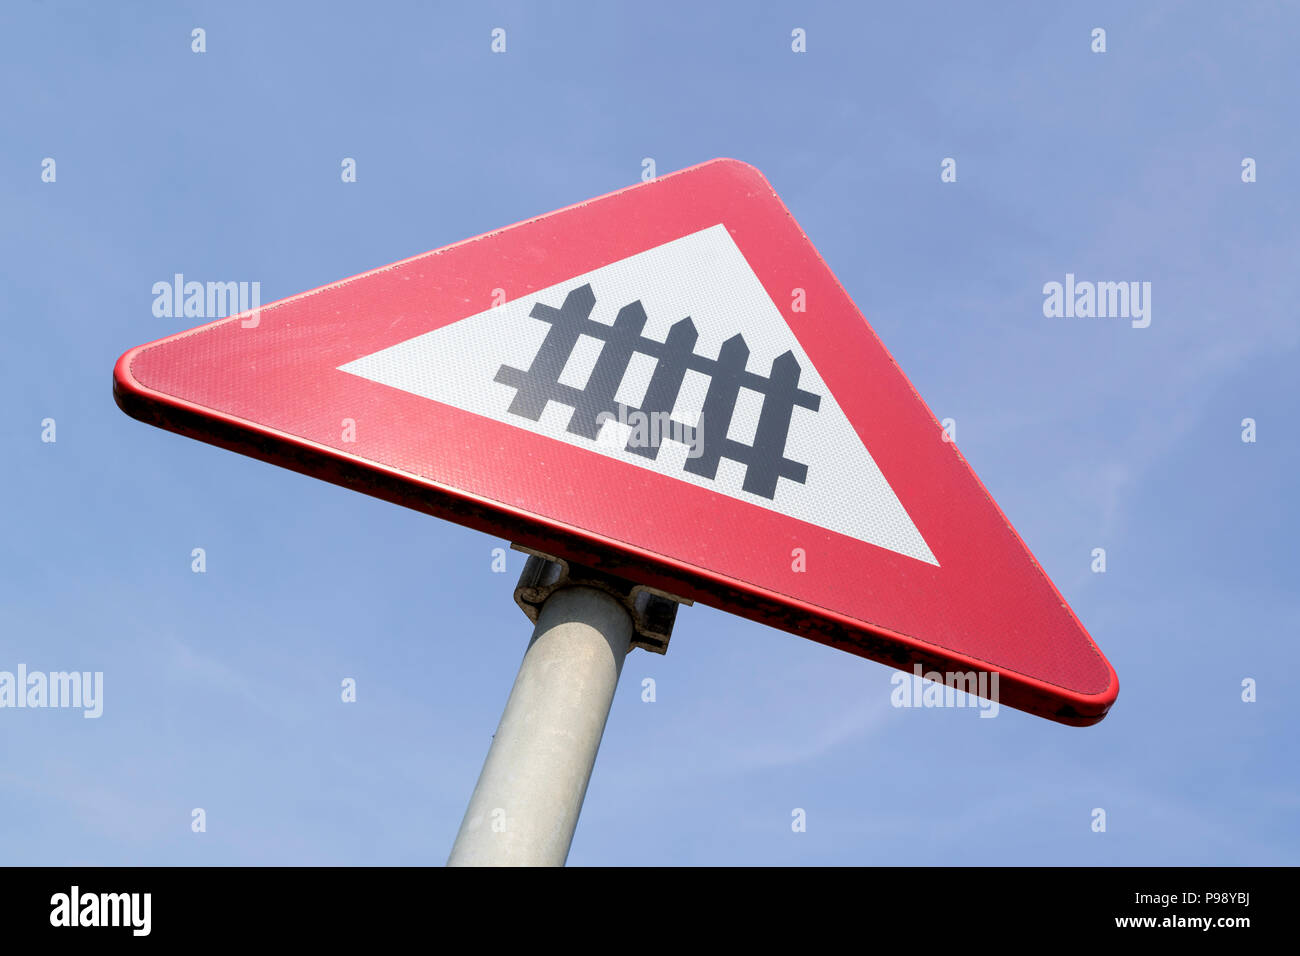 Dutch Road Sign Level Crossing With Barrier Or Gates Ahead Stock Photo Alamy